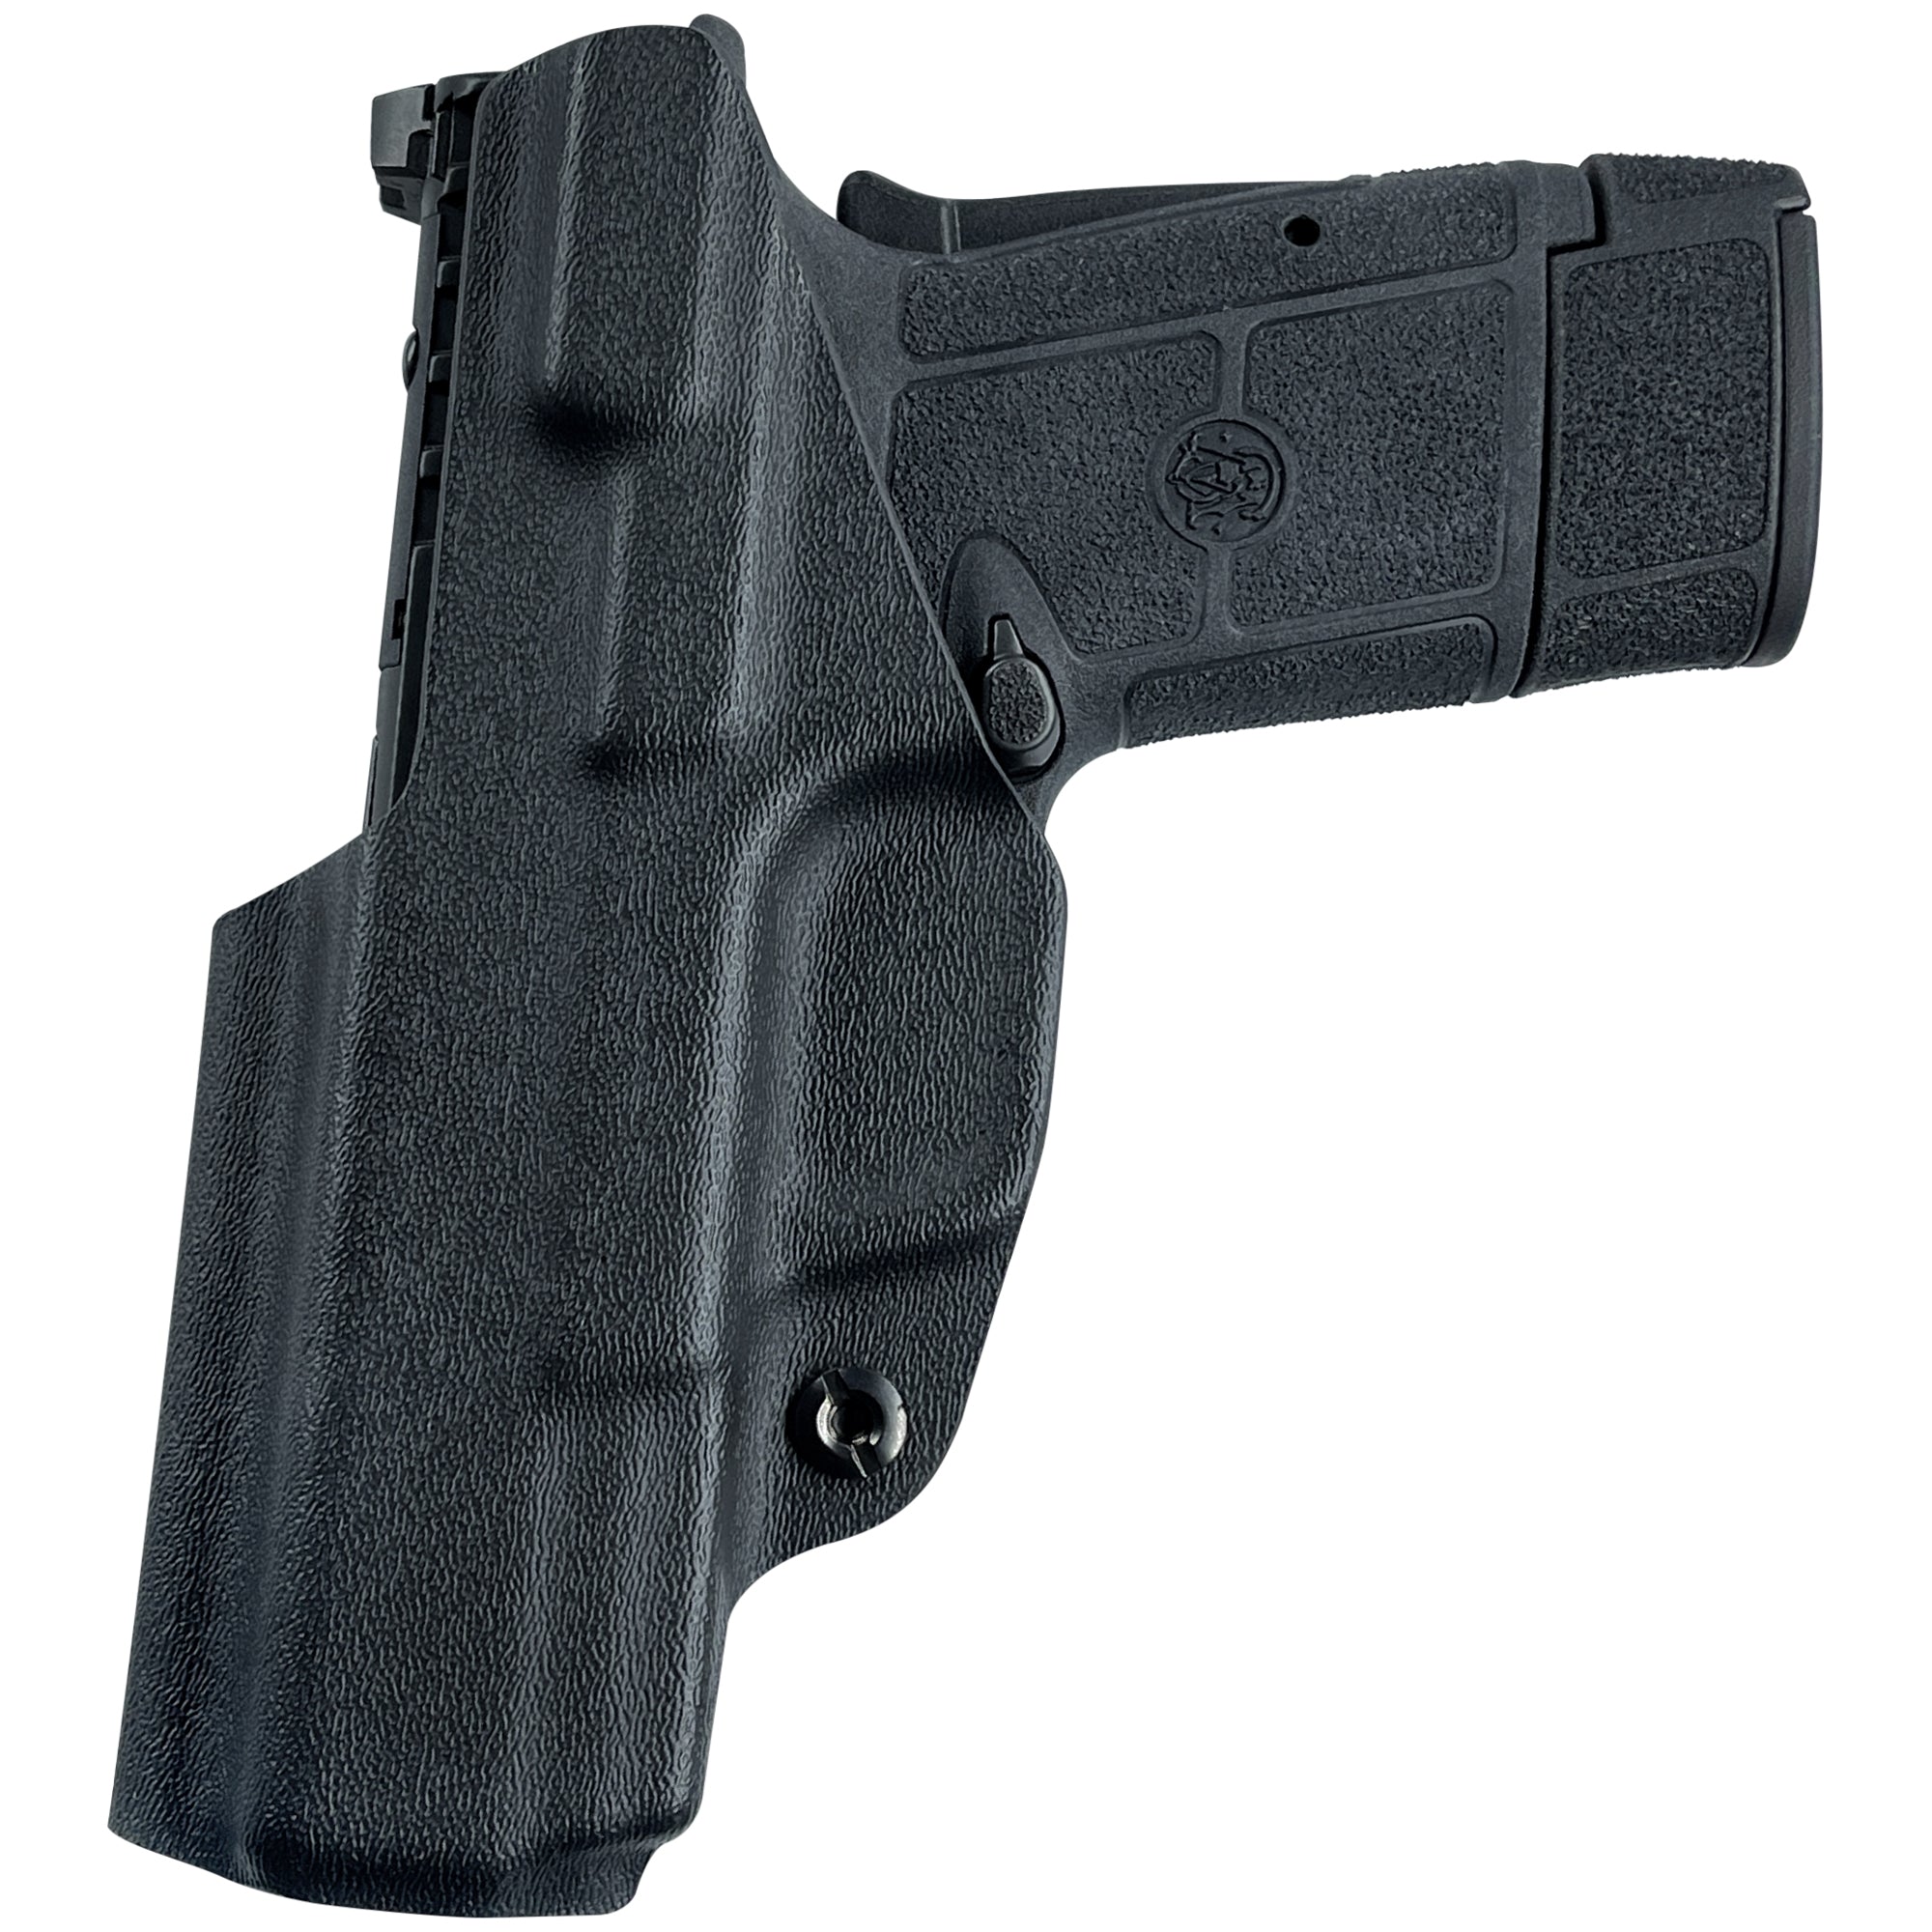 Smith & Wesson Equalizer IWB Sweat Guard Holster